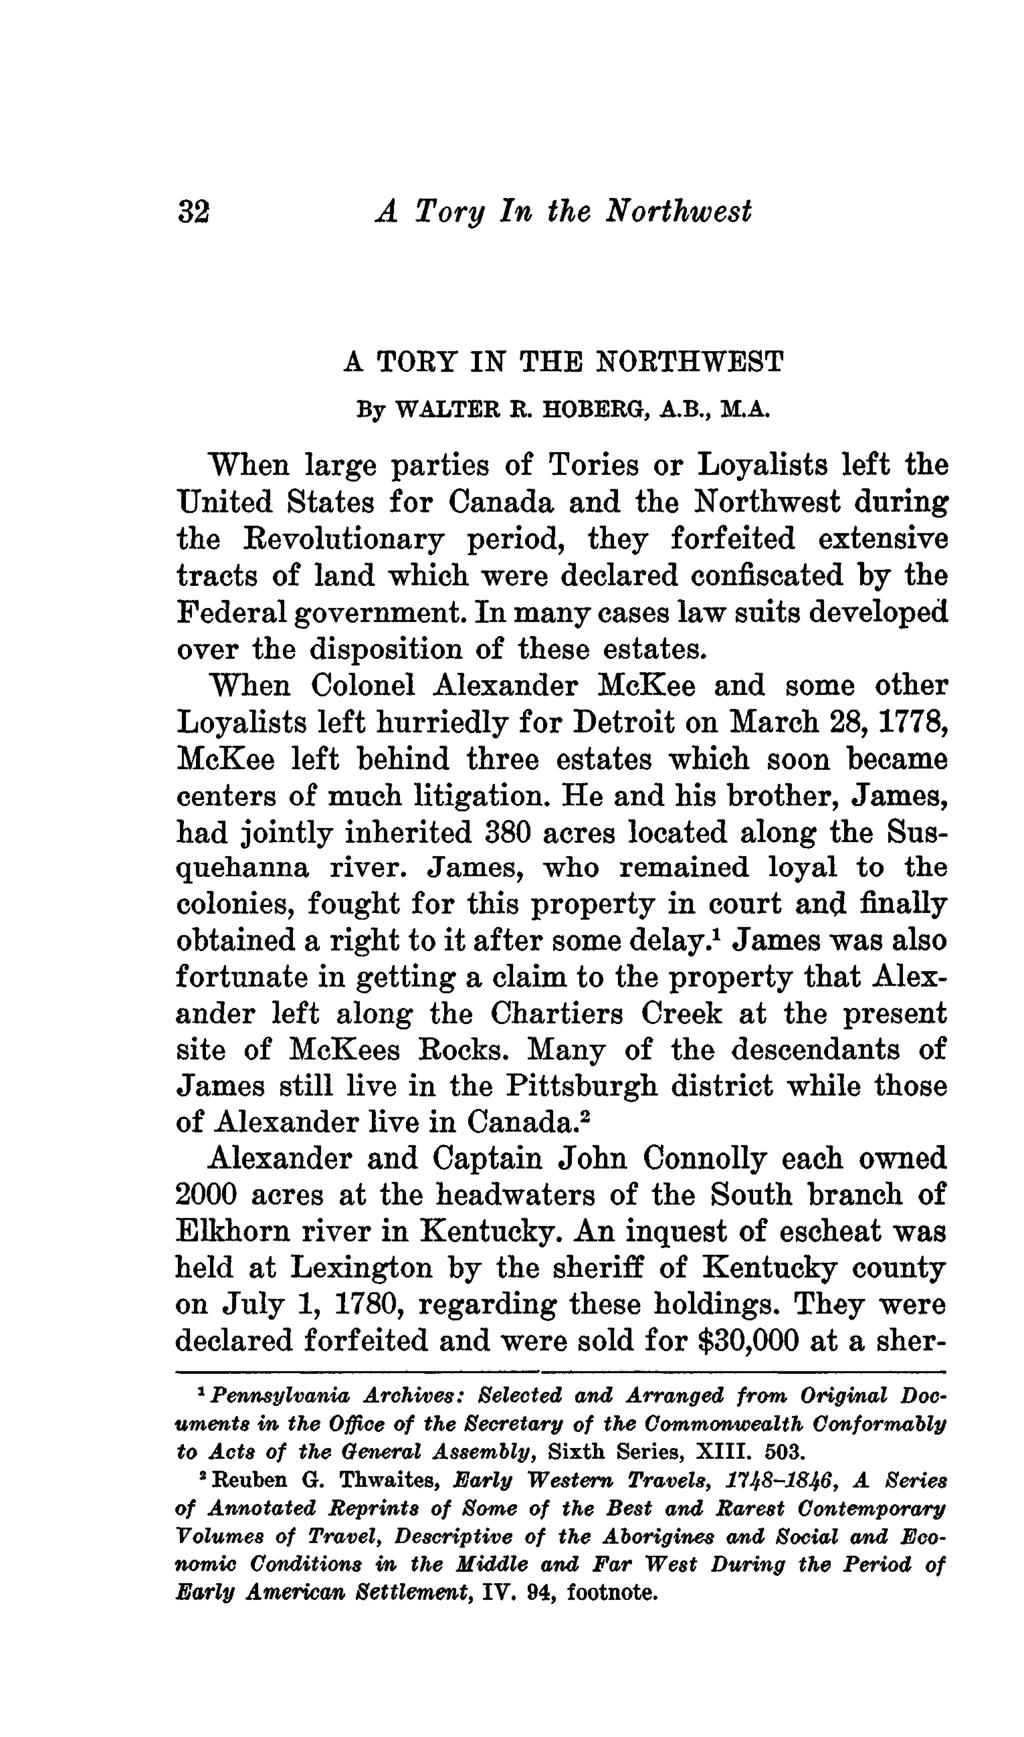 32 A Tory In the Northwest A TOEY IN THE NOKTHWEST By WALTER R. HOBERG, A.B., M.A. When large parties of Tories or Loyalists left the United States for Canada and the Northwest during the